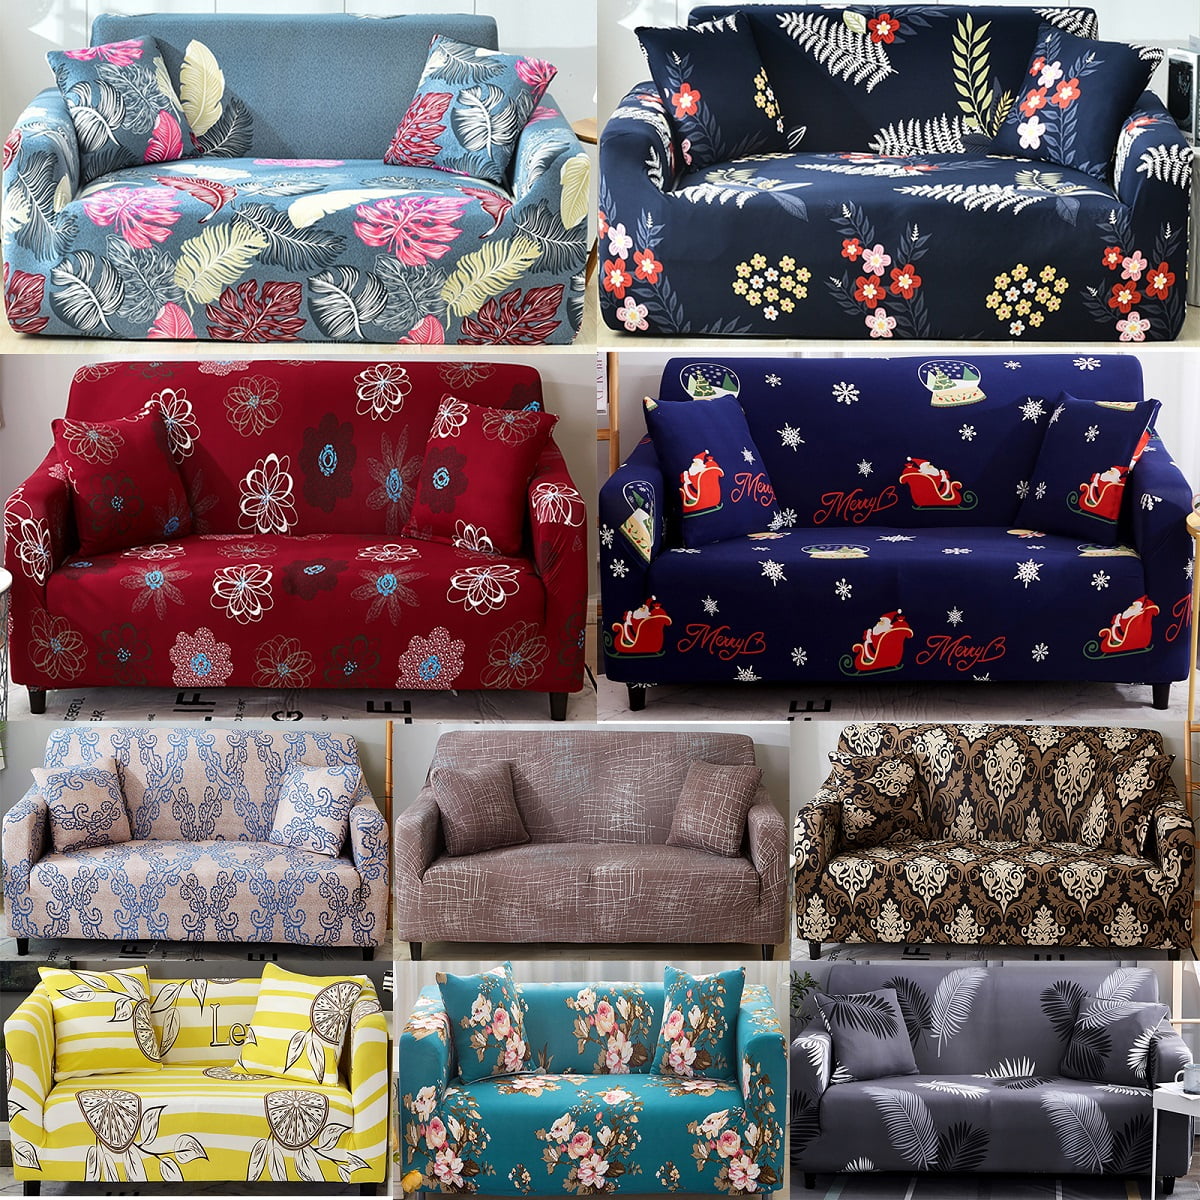 Stretch Printing 1/2/3 Seater Sofa Covers Elasticity Protector Couch Slipcover 